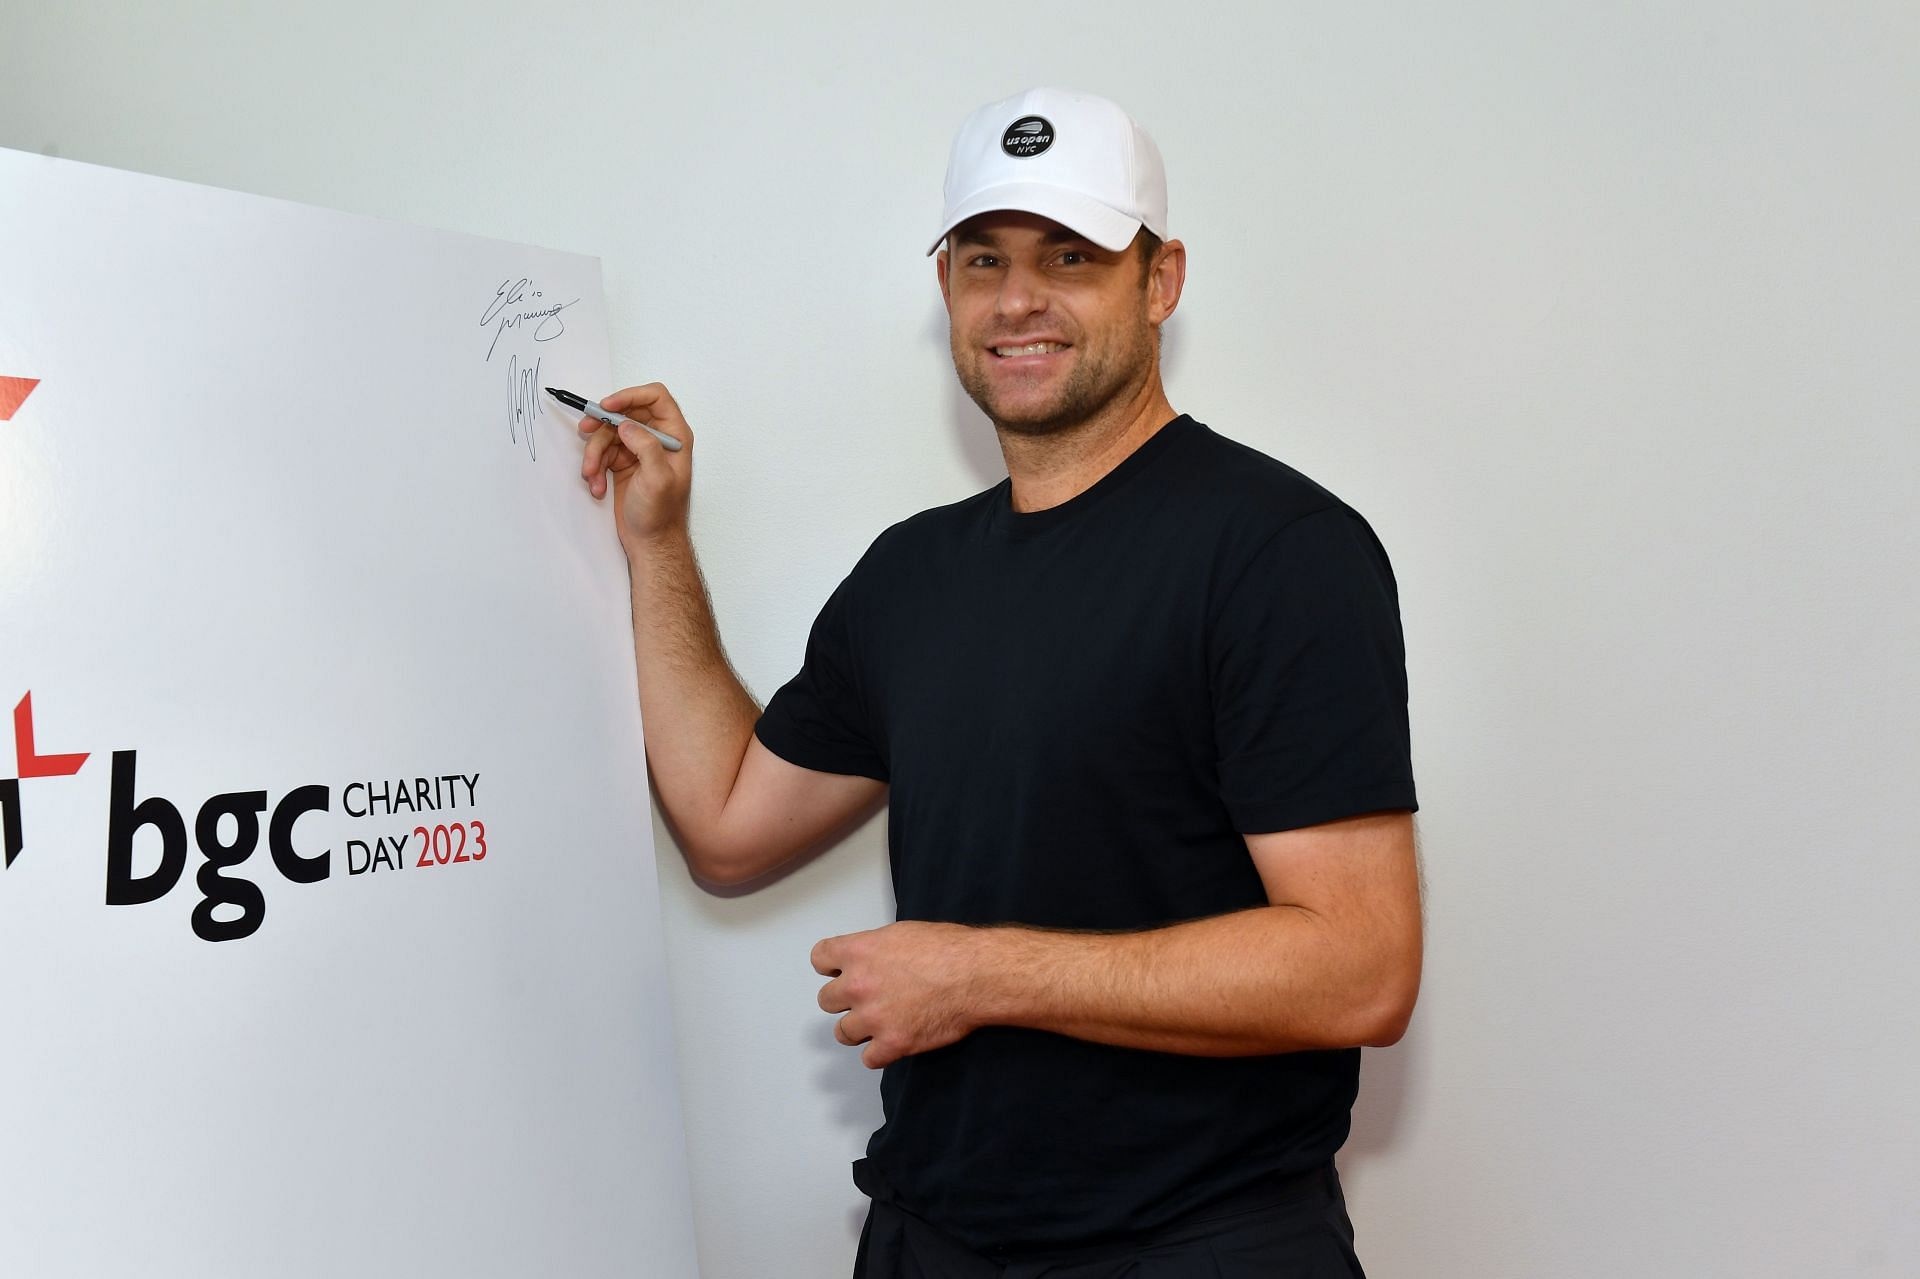 Andy Roddick 'knocks the cr*p out of his head' on his door frame, gets caught on camera in hilarious promotional video for his podcast